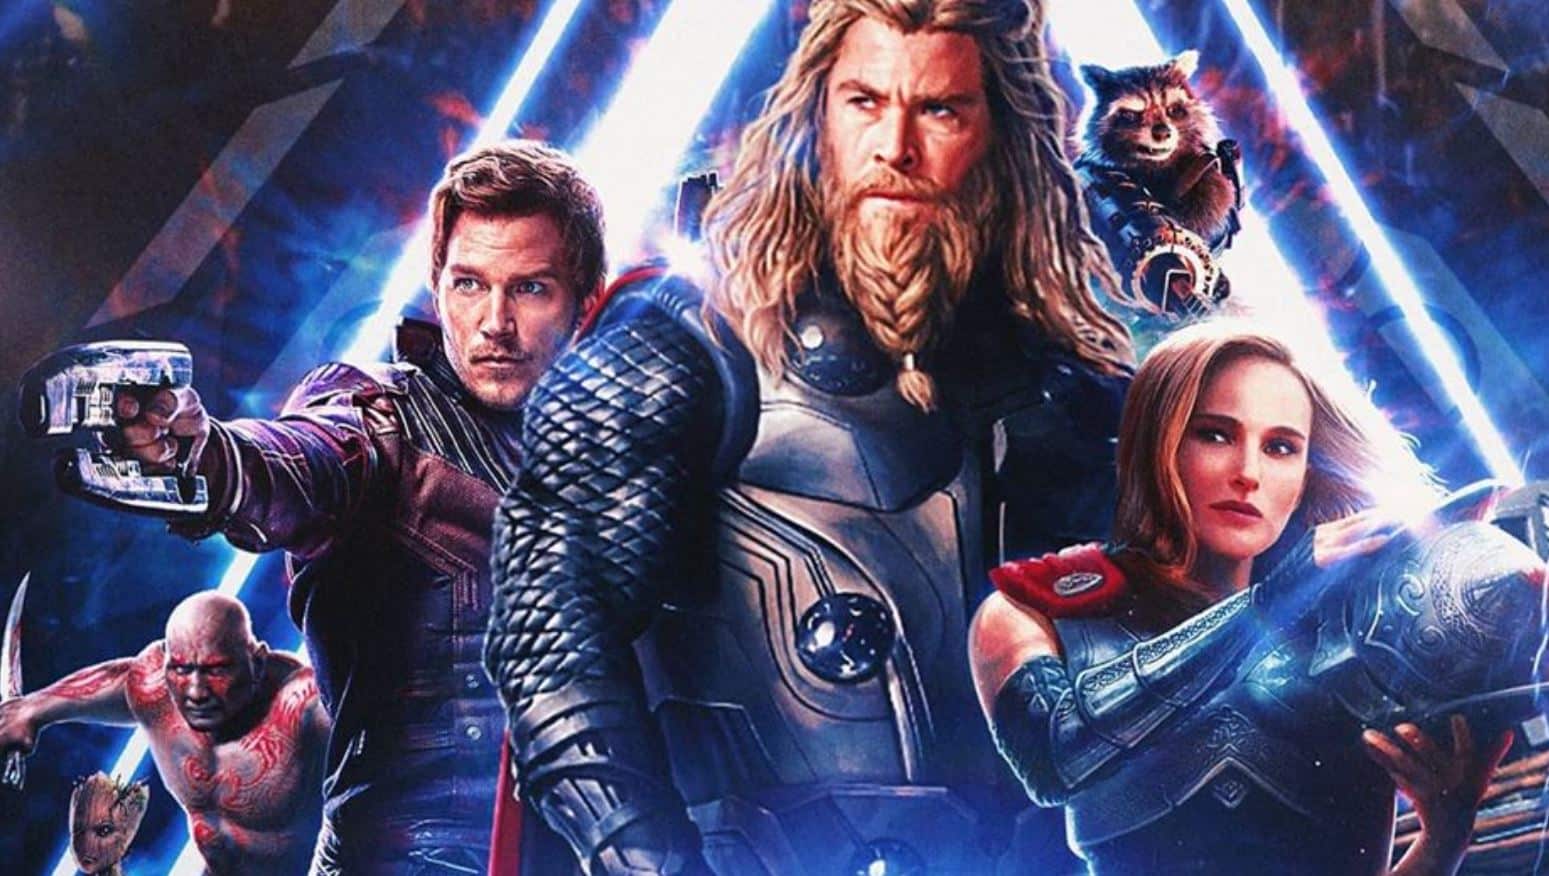 Jesus Christ's Cameo Was Supposedly Included In Thor: Love and Thunder